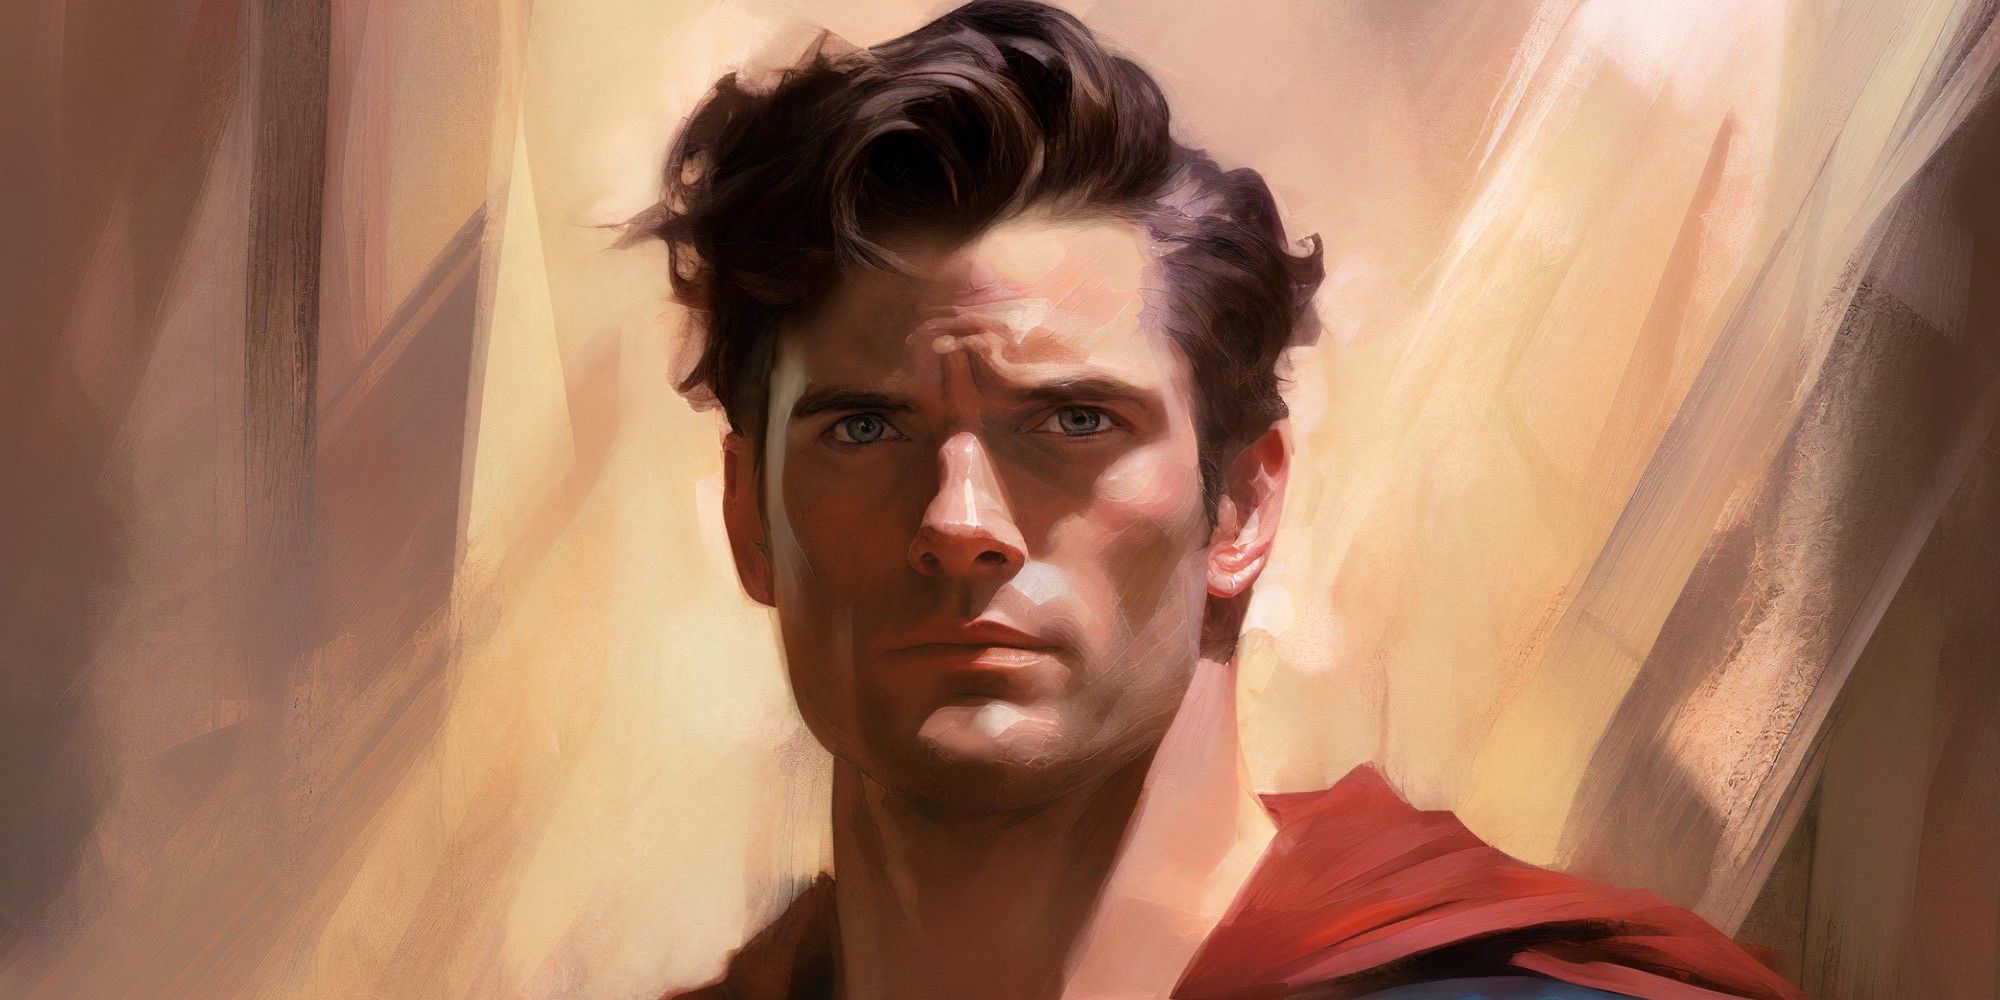 Fan art of reported Superman: Legacy frontrunner David Corenswet as Superman in painterly style.